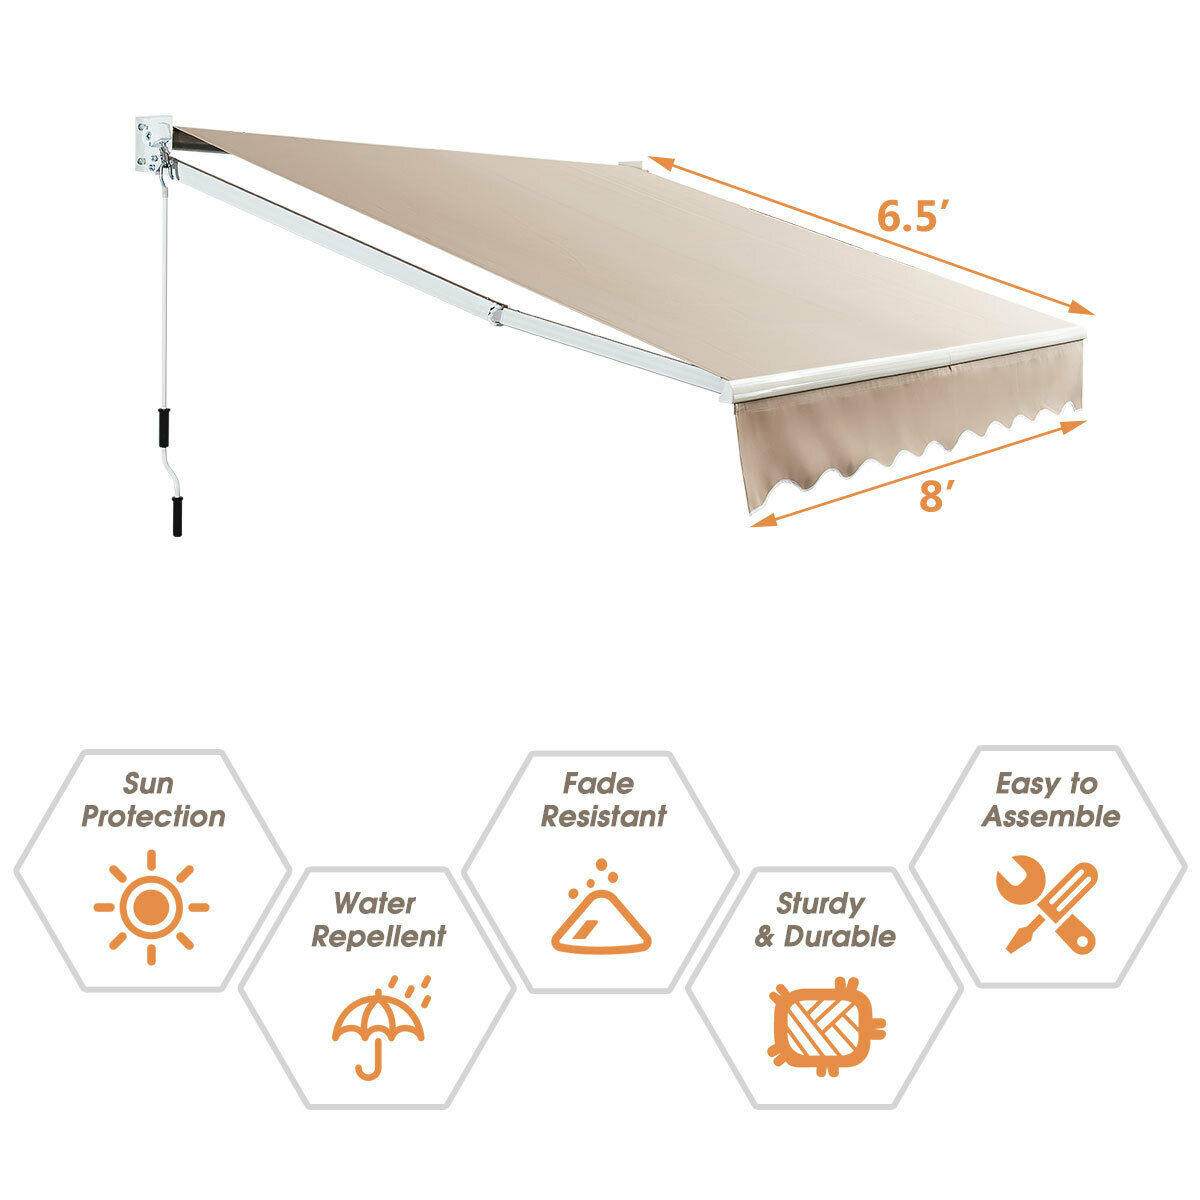 Details about   8'×6.5'Retractable Awning Aluminum Patio Sun Shade w/Crank Handle Water-Resistan